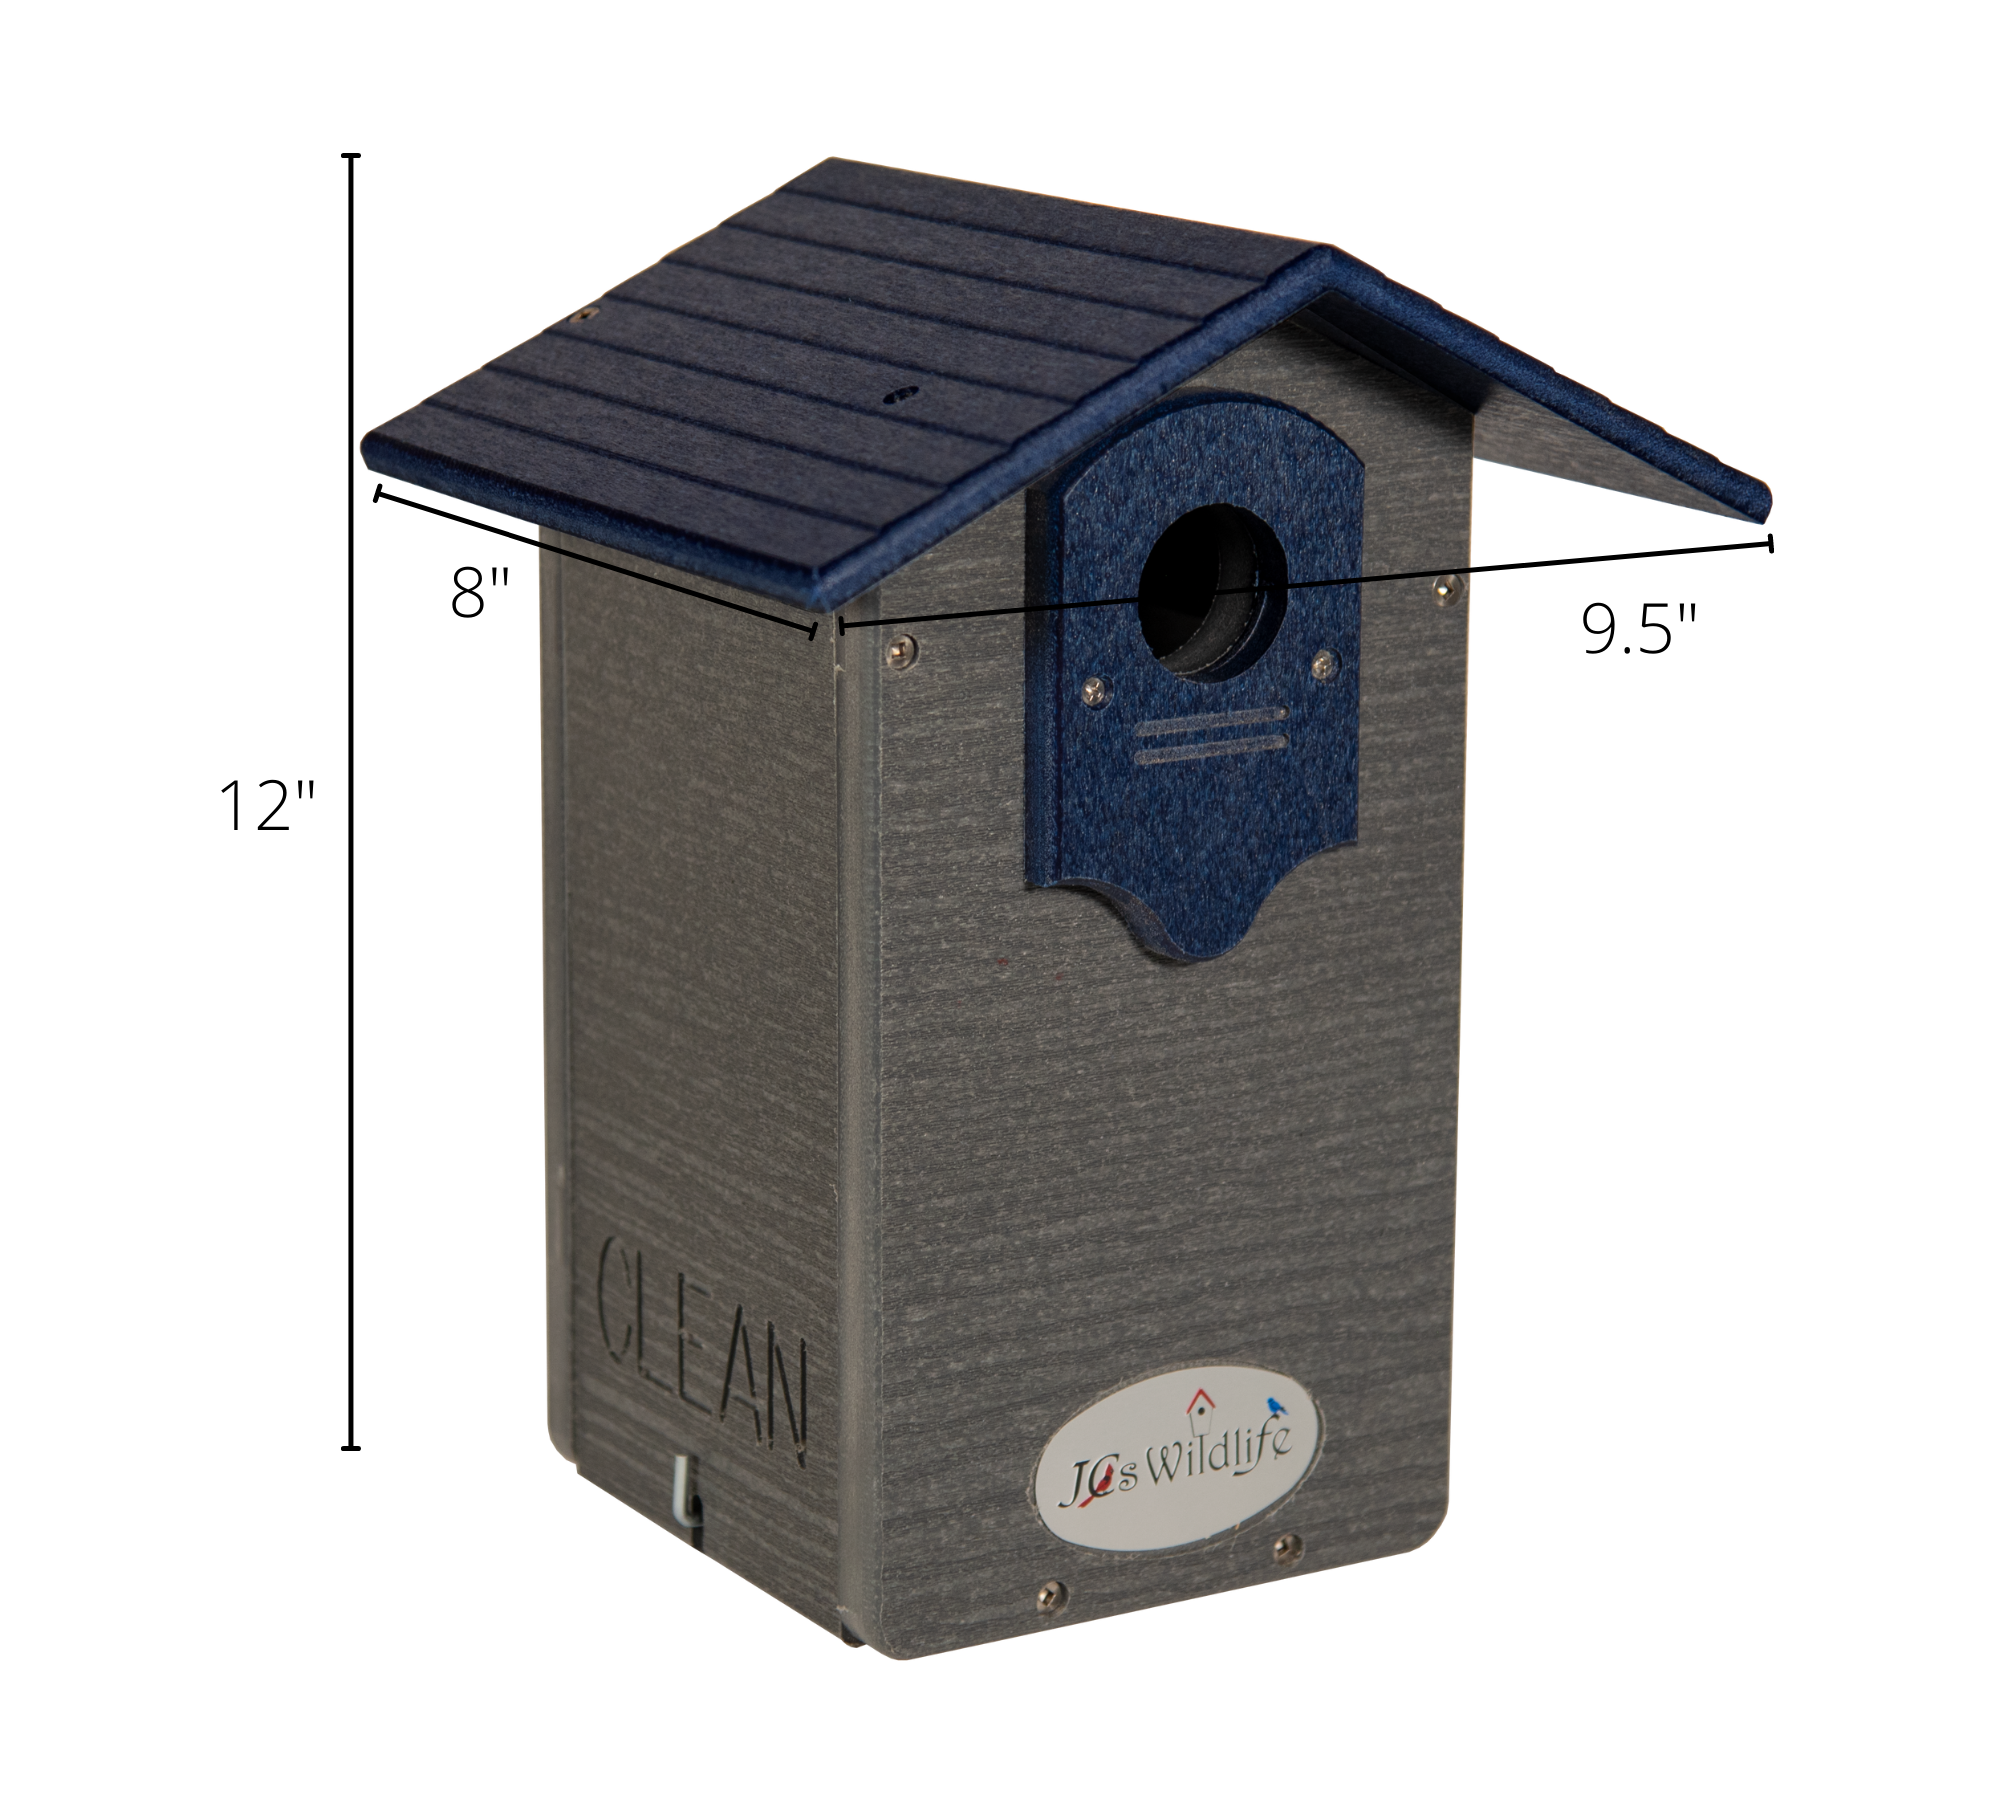 Bundles with Poles available! Details about   JCs Wildlife Ultimate Bluebird House 